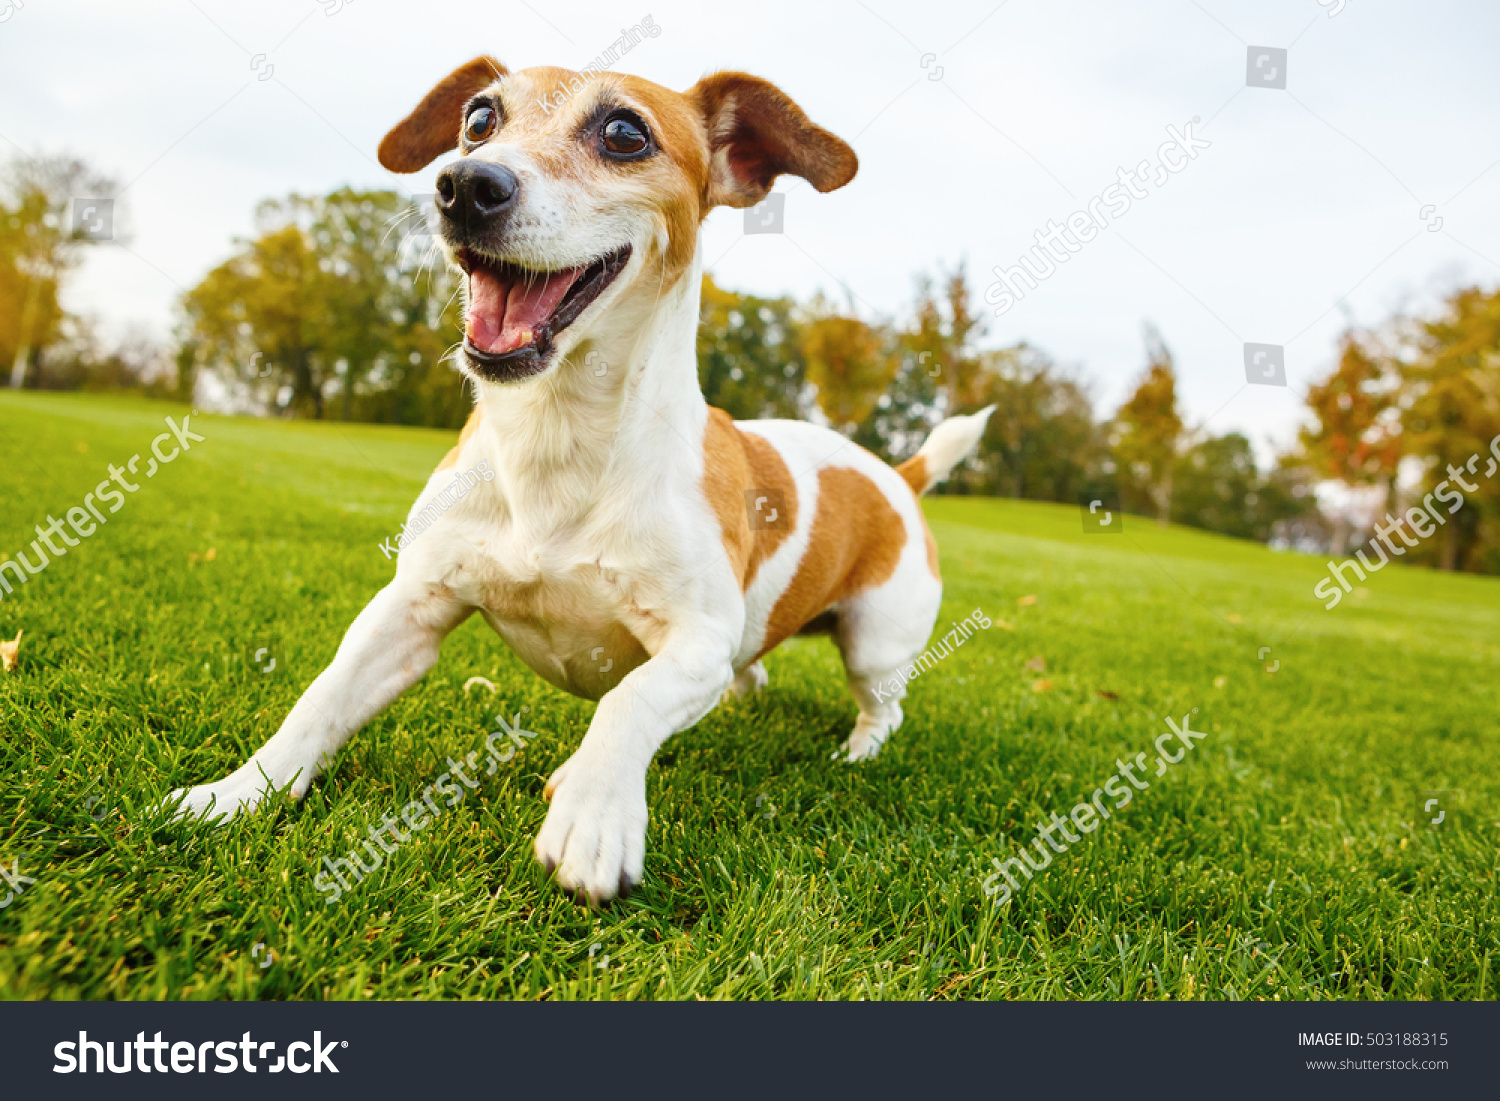 Active frisky small pet playing dancing on the grass. Smiling cute Jack russell terrier in the dynamic pose in the movement.   series of photos #503188315